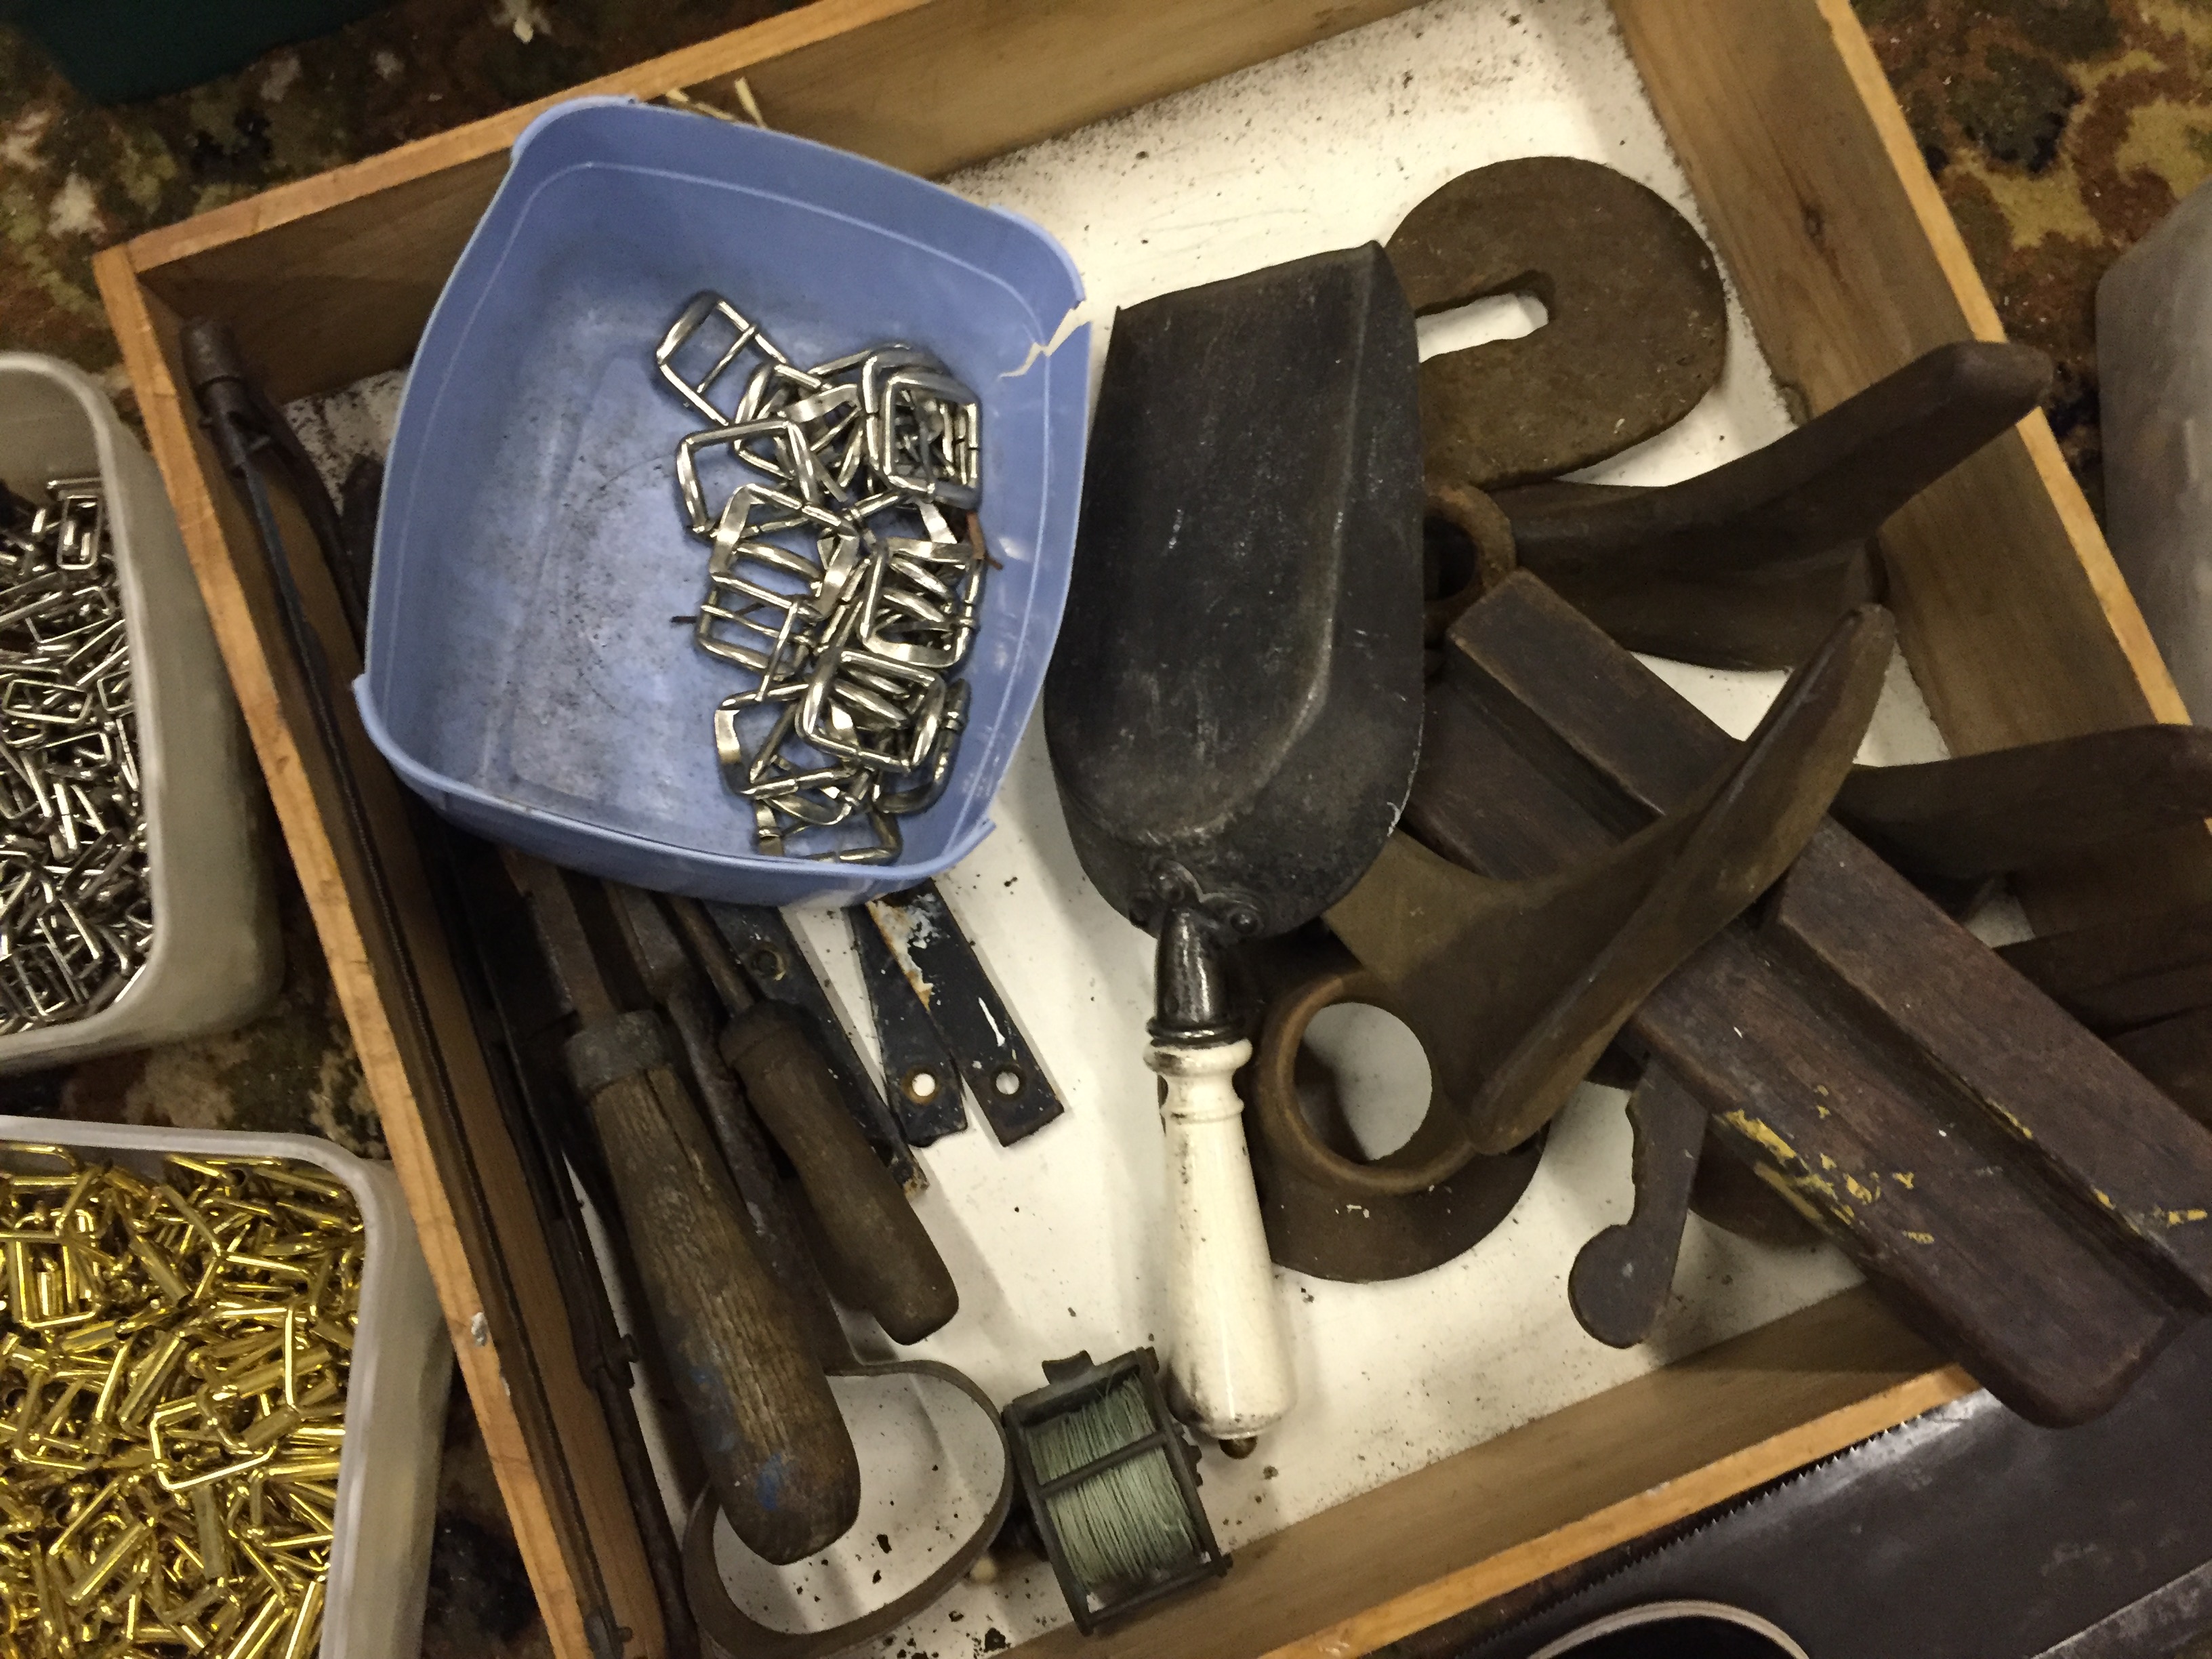 A large selection of belt buckles and clasps for making belts tools and cobblers shoe lasts. - Image 5 of 6